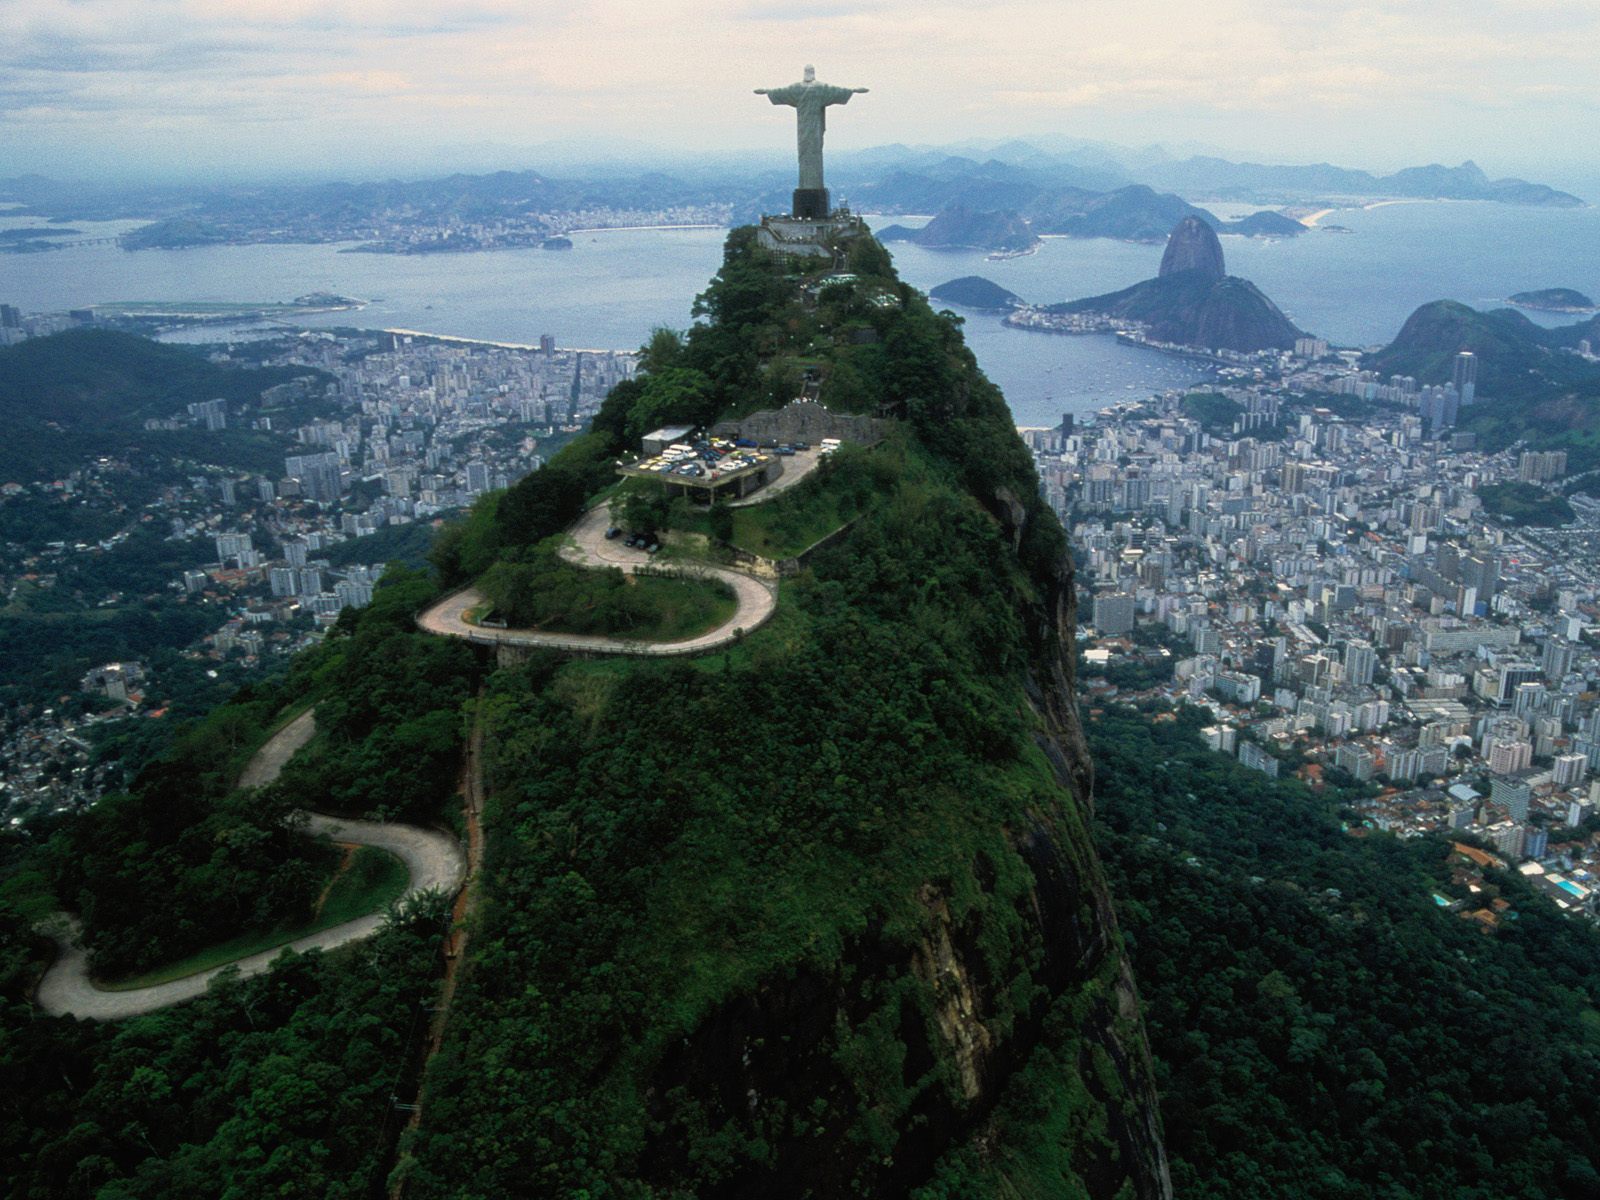 Brazil HD Wallpaper Check Out The Cool